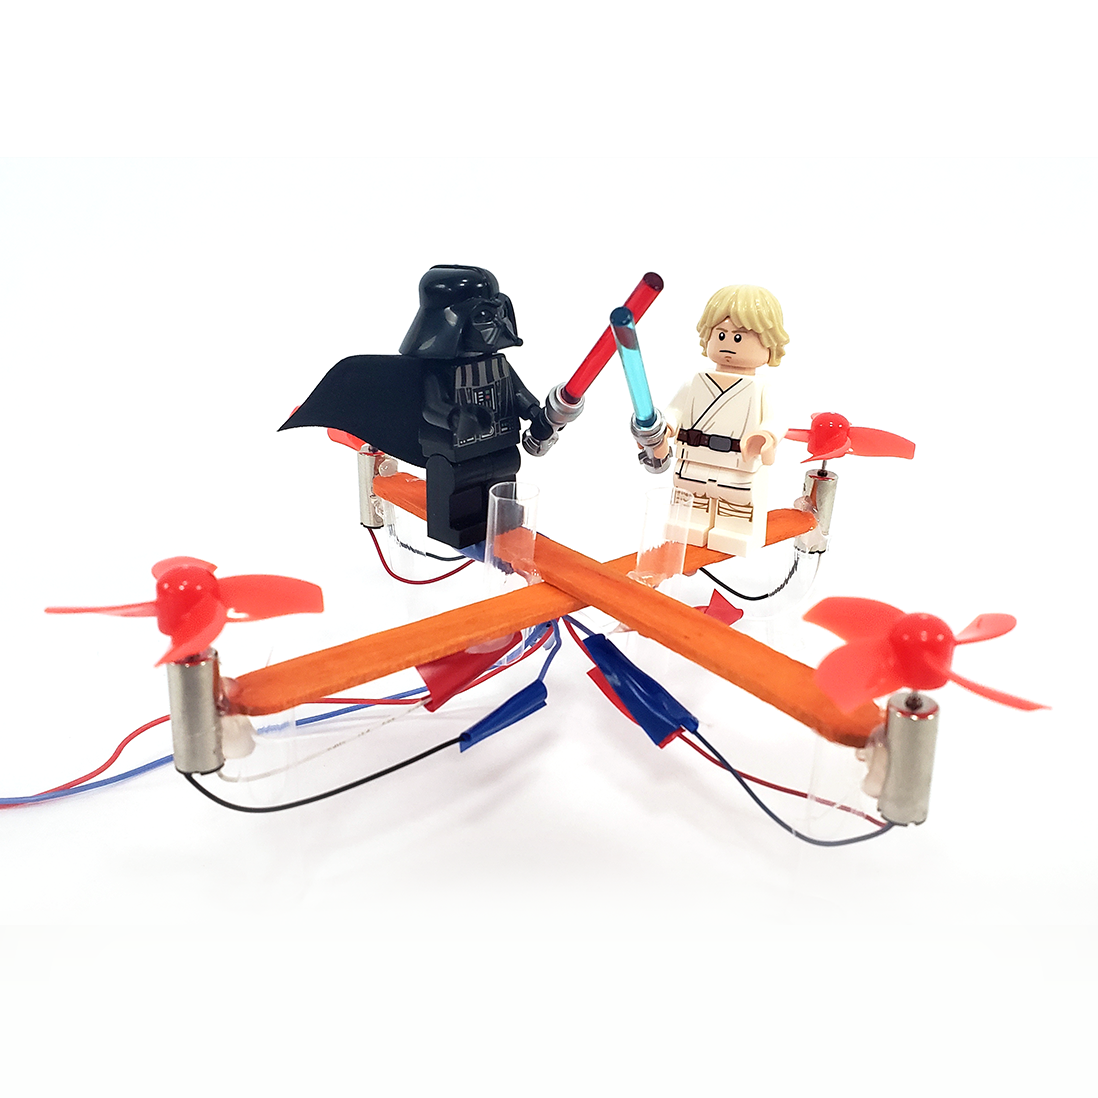 Mini popsicle stick drone with Star Wars characters for Star Wars Day - STEM Calendar For Educators: Month By Month STEM Projects